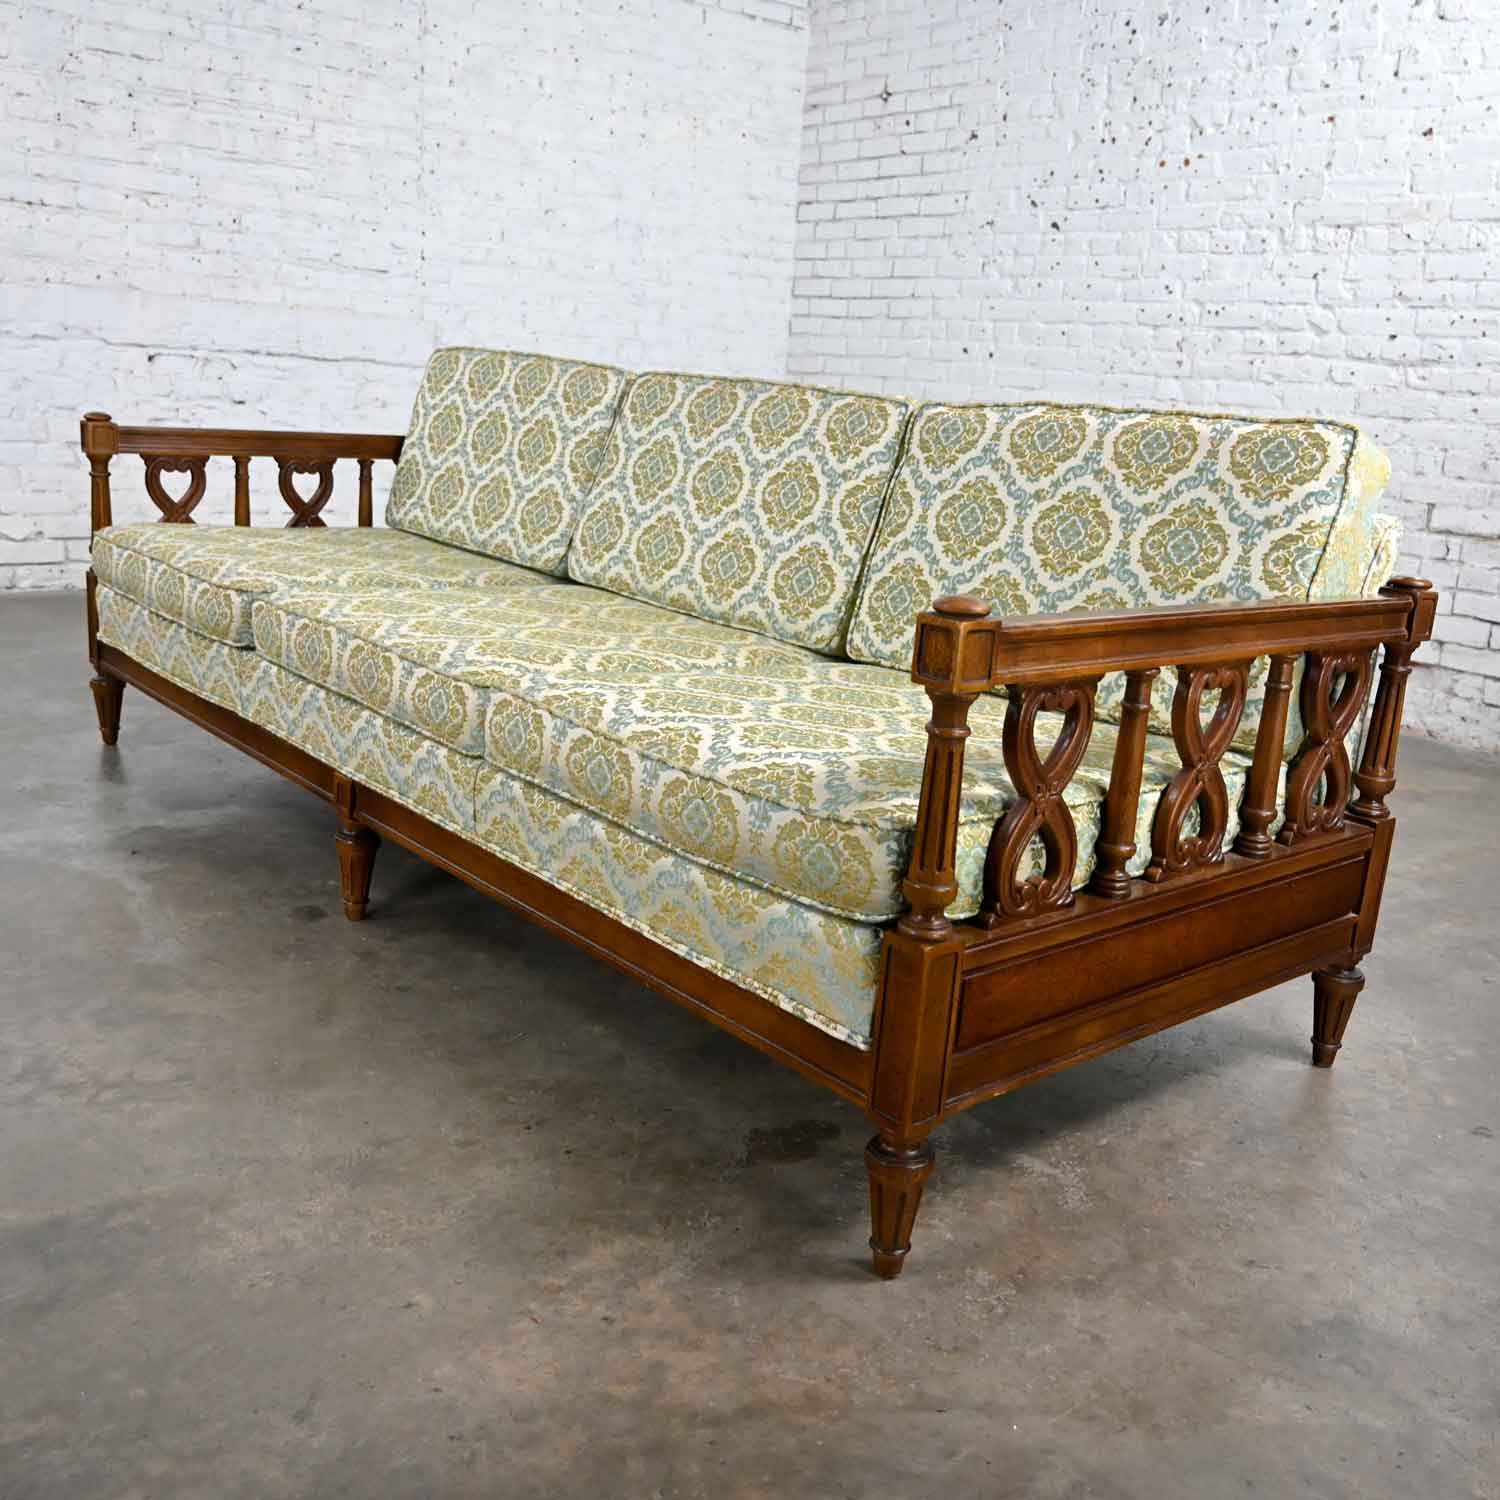 Vintage Mediterranean Spanish Revival Style Sofa by American of Martinsville